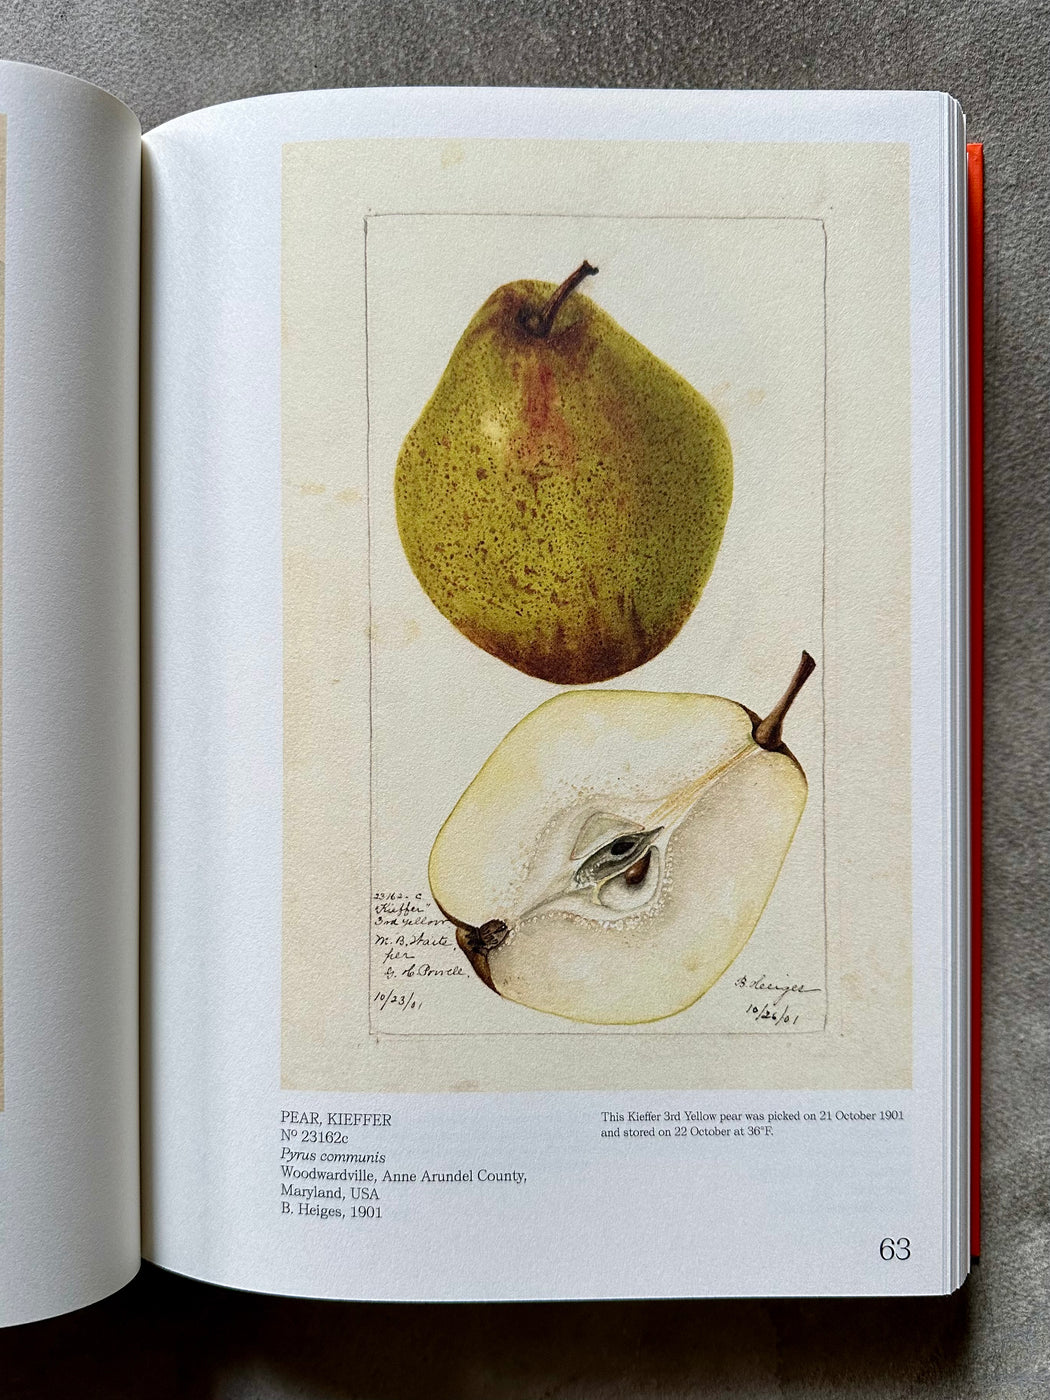 "An Illustrated Catalog of American Fruits and Nuts"